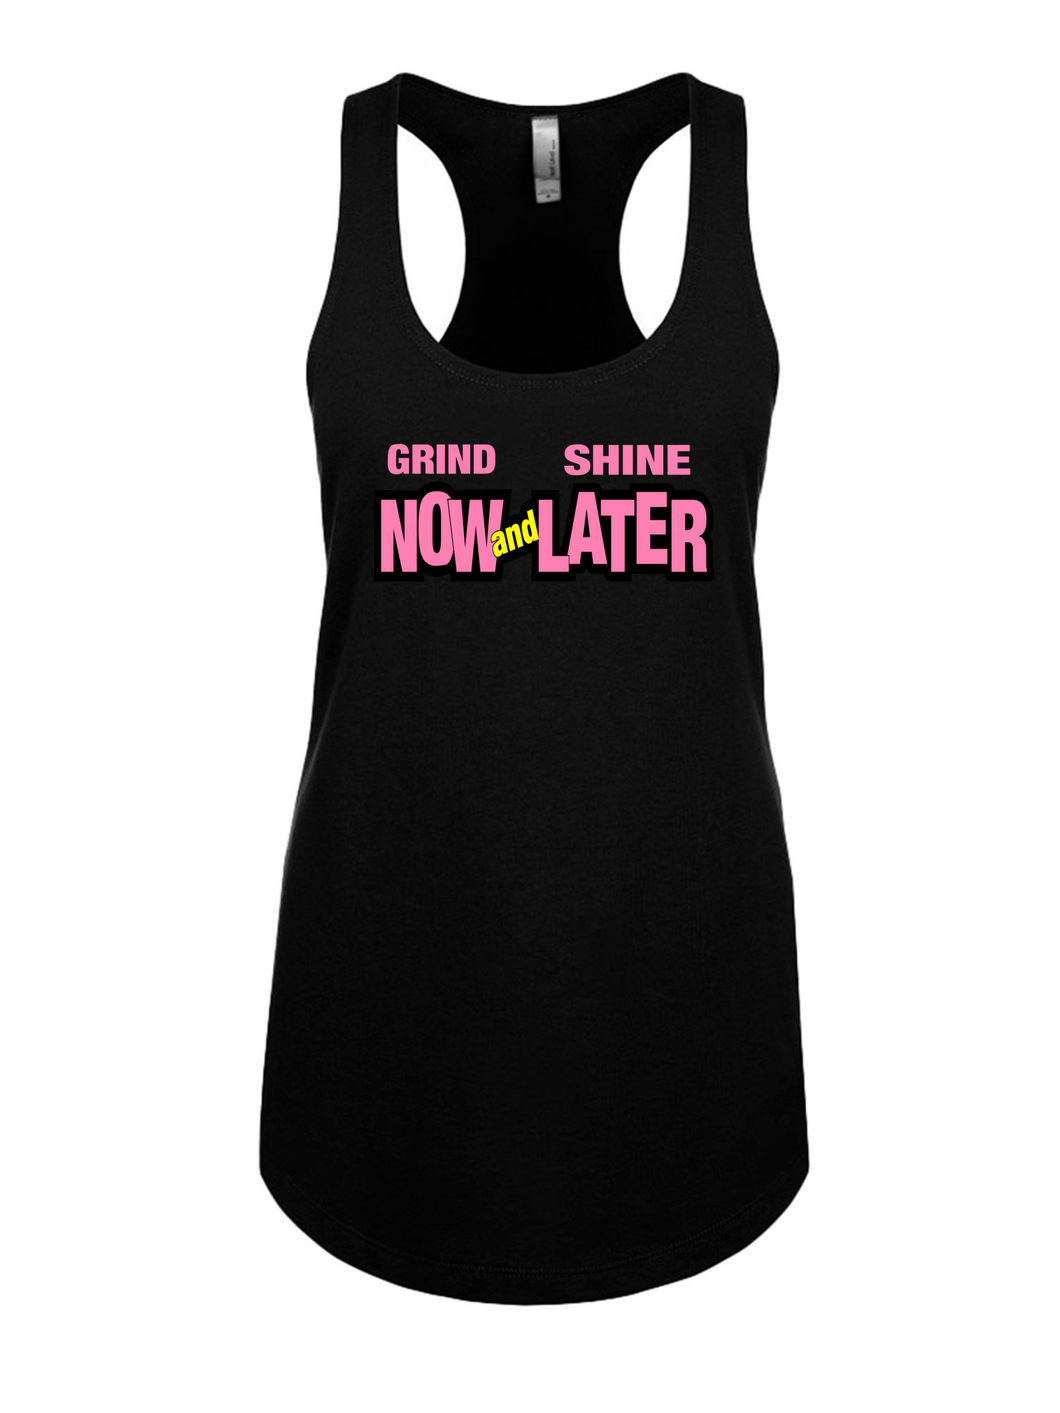 Grind and Shine (Tank and Tee)